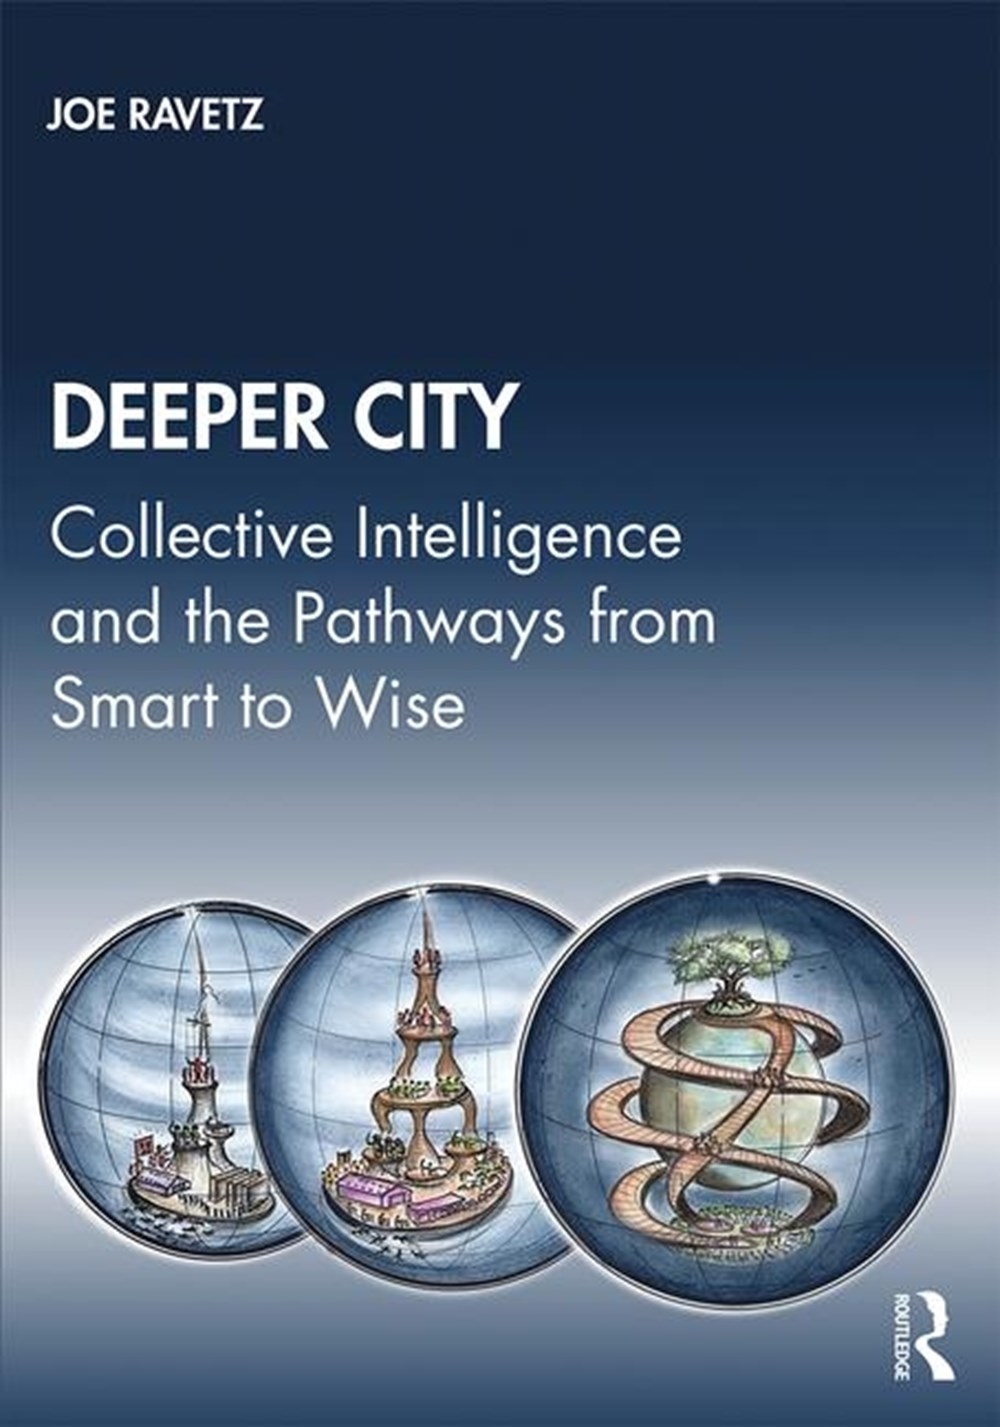 Deeper City: Collective Intelligence and the Pathways from Smart to Wise